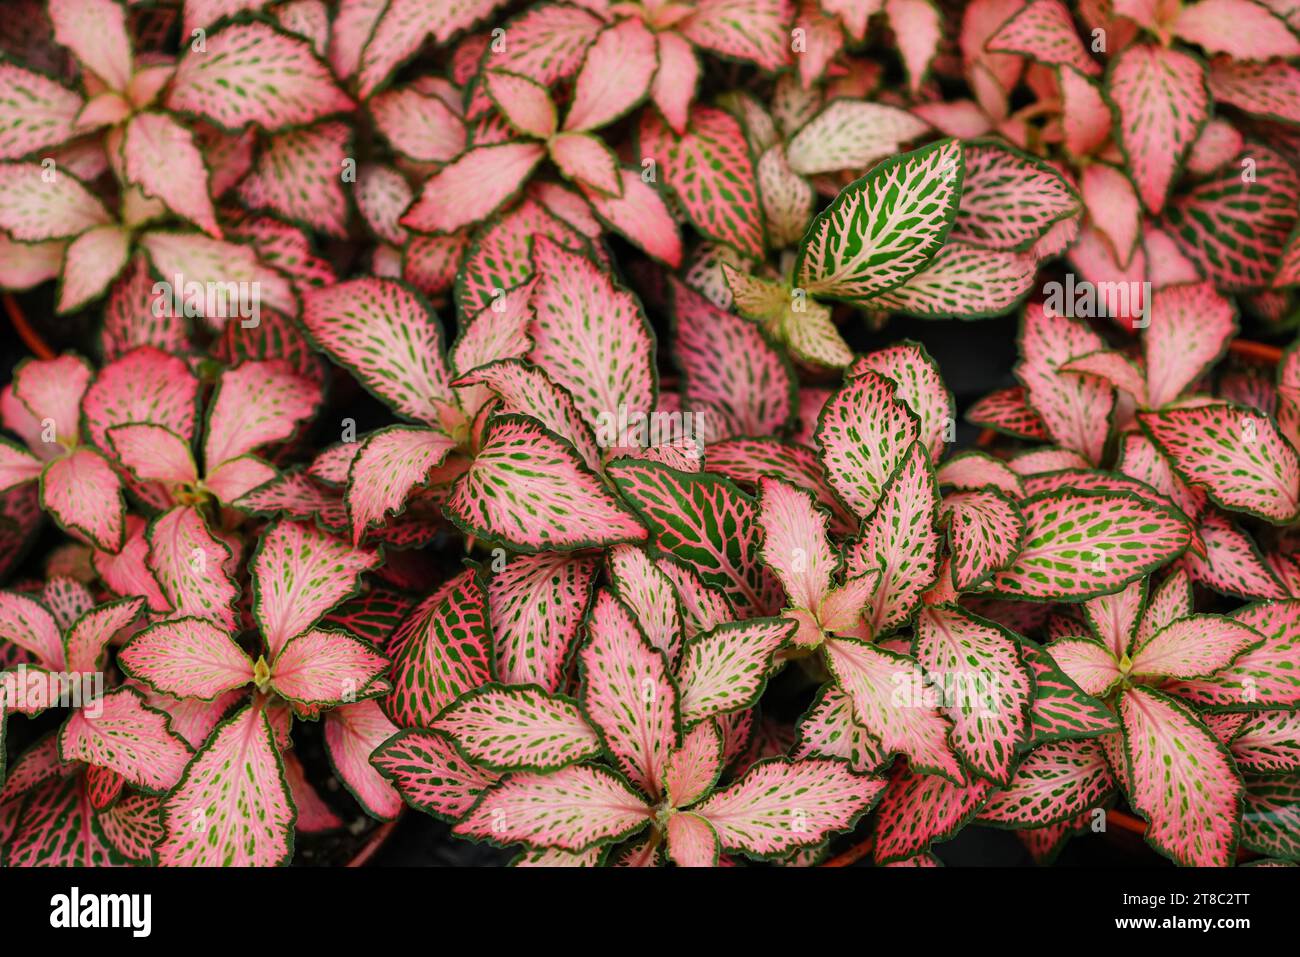 Closeup on a colorful cluster of pink colored indoor nerve plants, Fittonia argyroneura Stock Photo